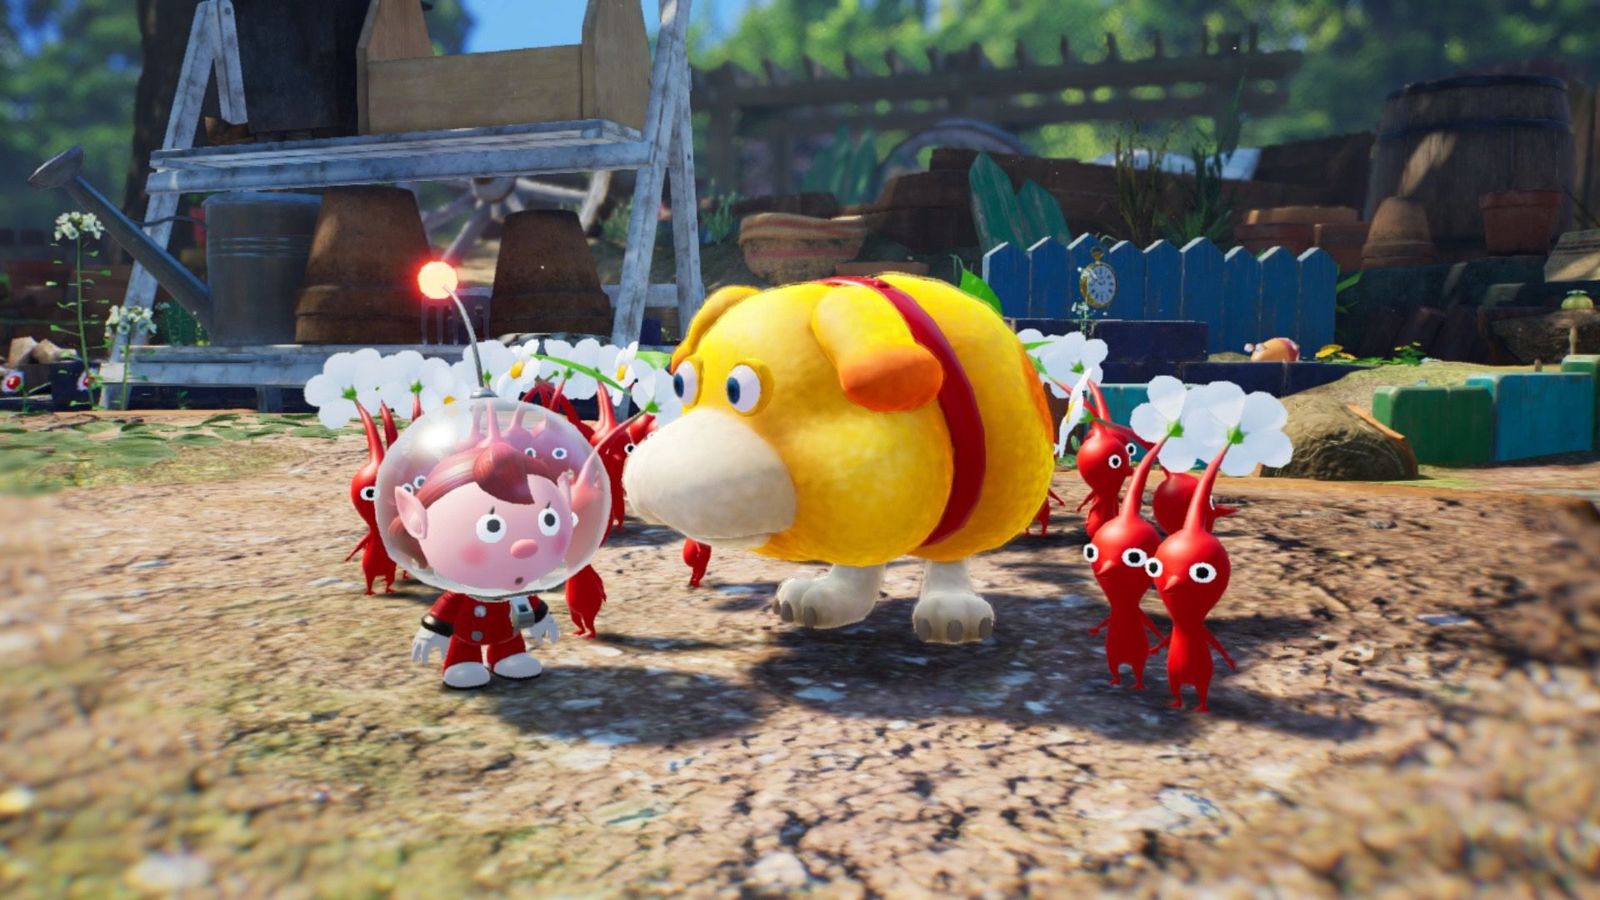 Pikmin 4 co-op gameplay, showing a group of Pikmin huddled around the dog Oatchi.